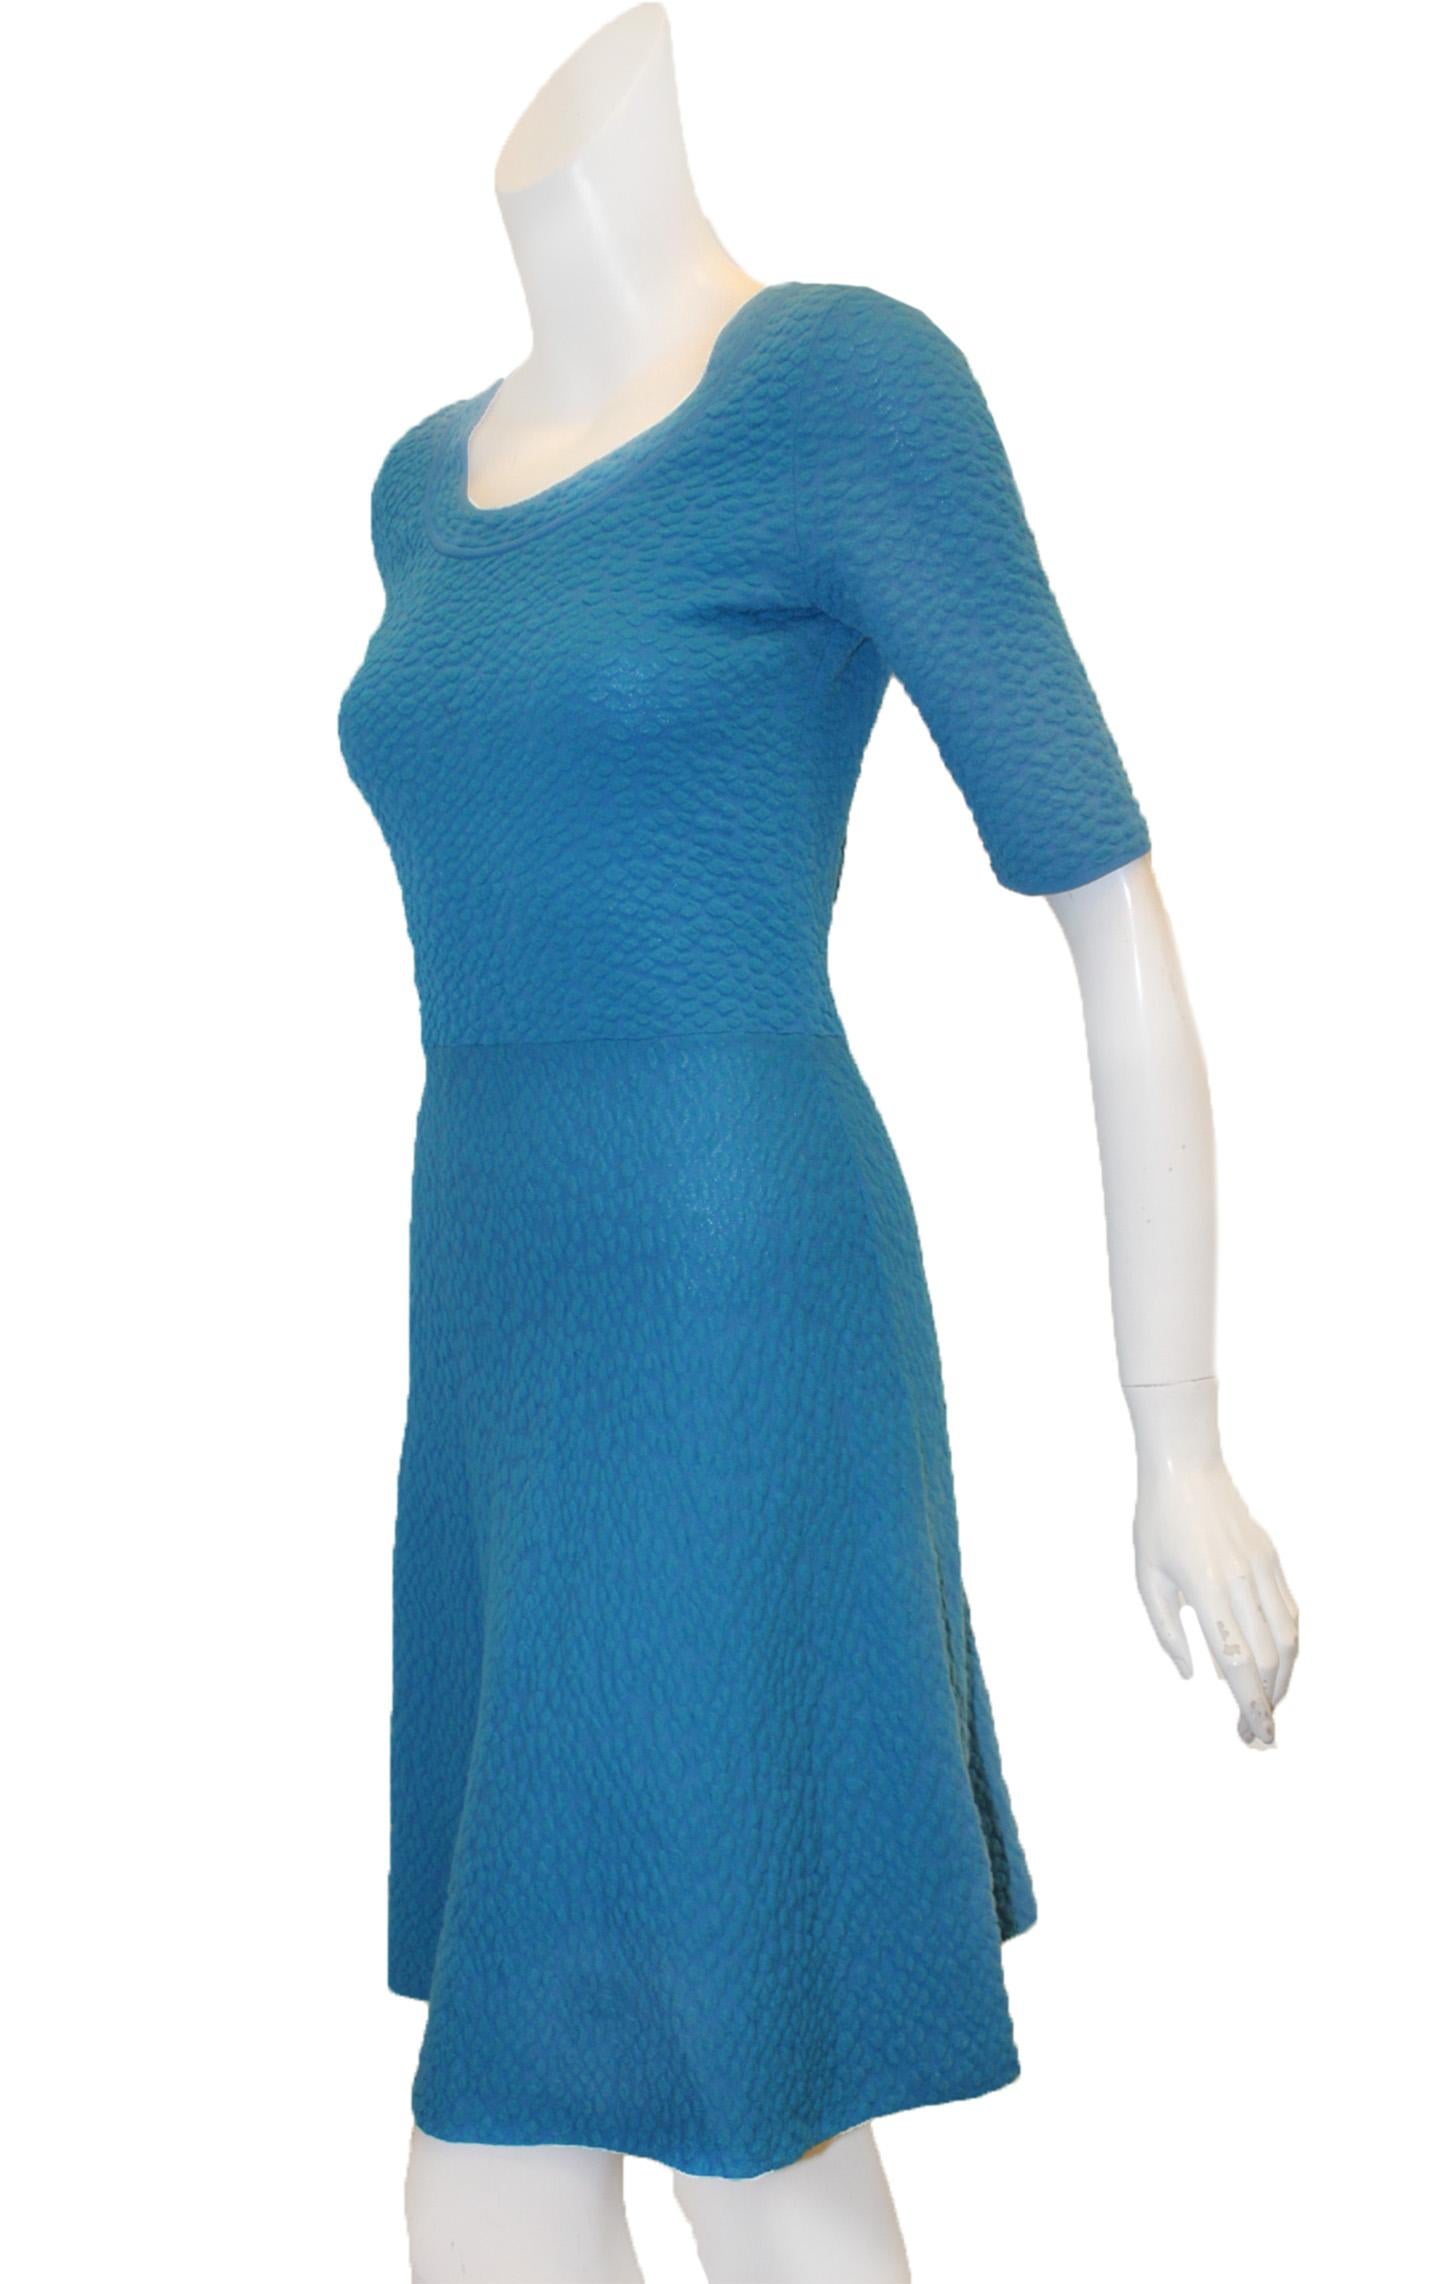 Missoni Textured Turquoise Knit Short Sleeve Dress In Good Condition For Sale In Palm Beach, FL